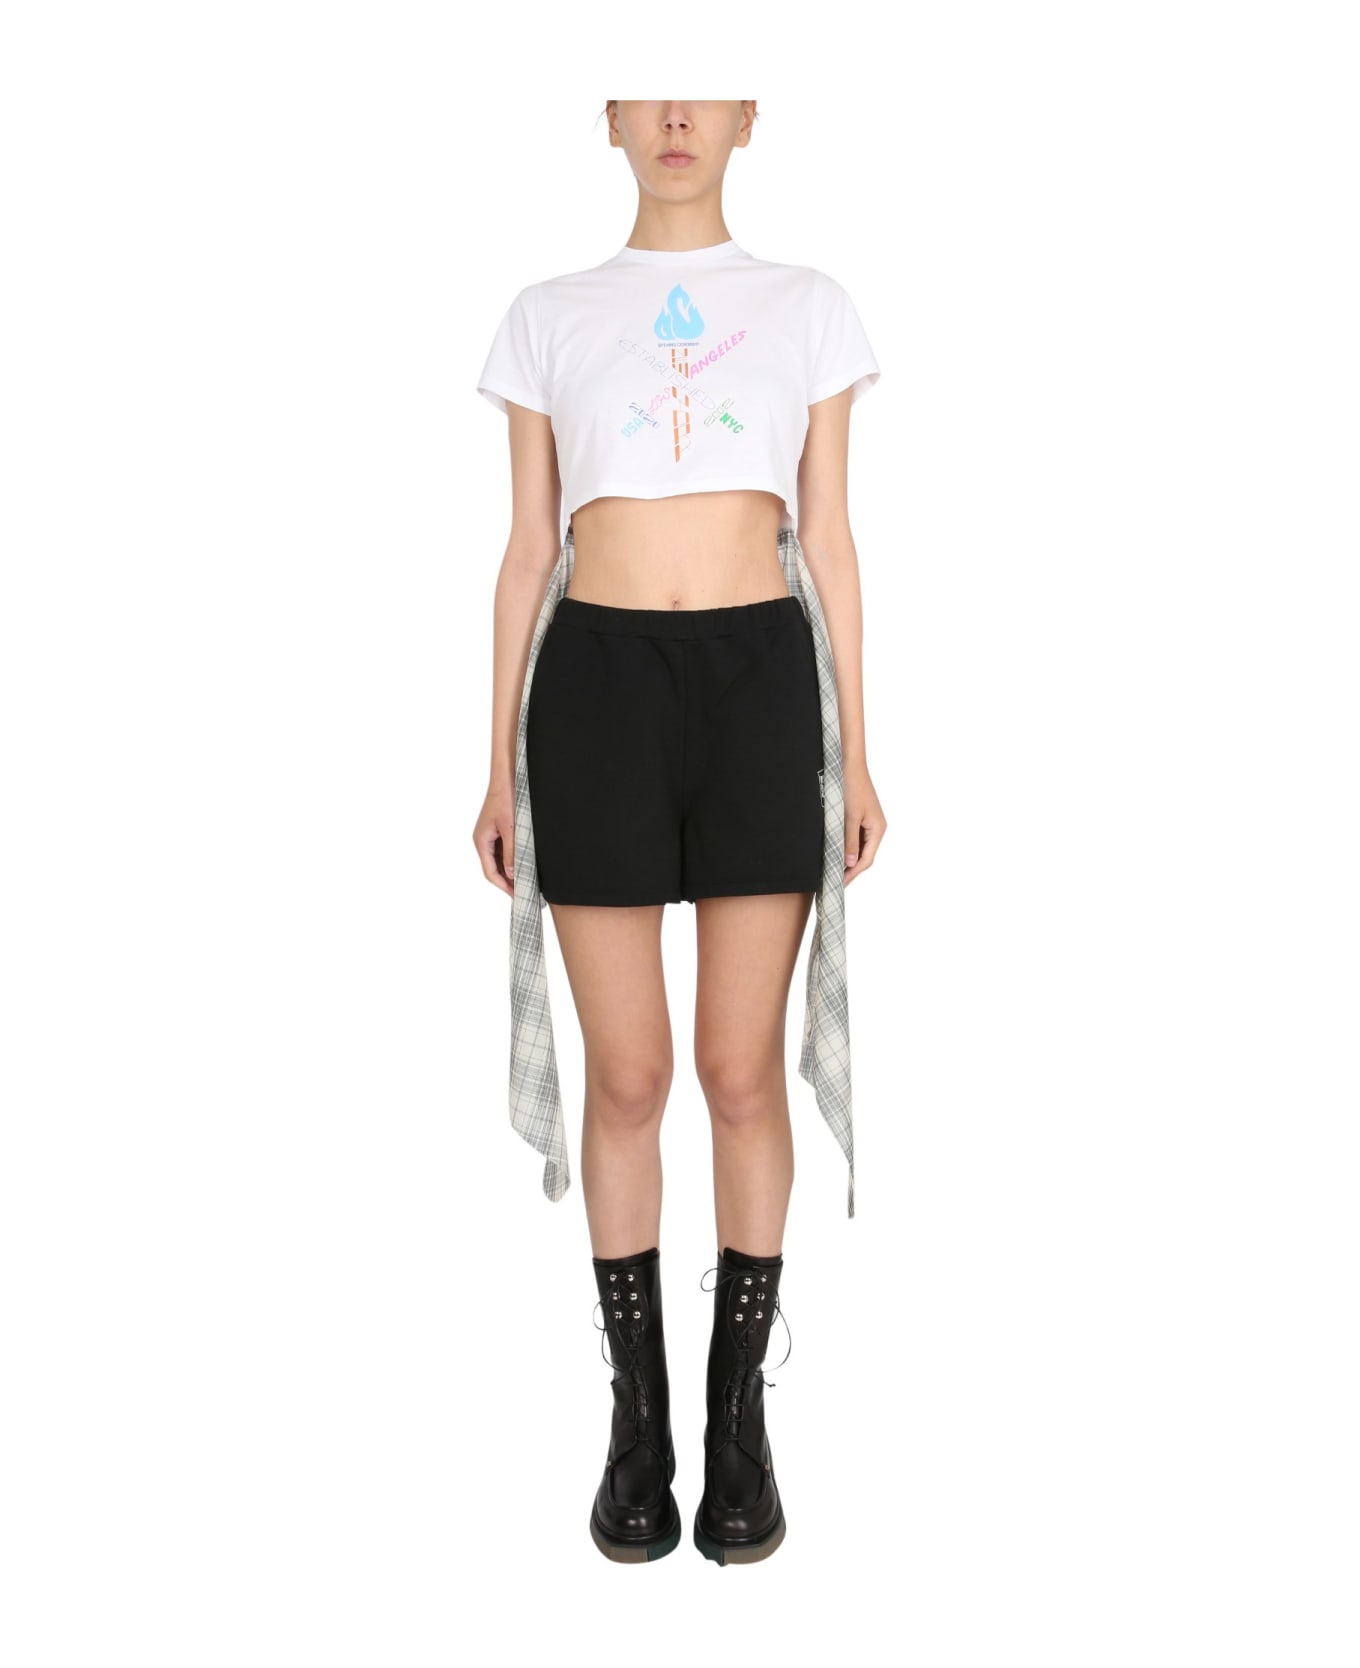 Opening Ceremony Word Torch Hybrid T-shirt - BIANCO